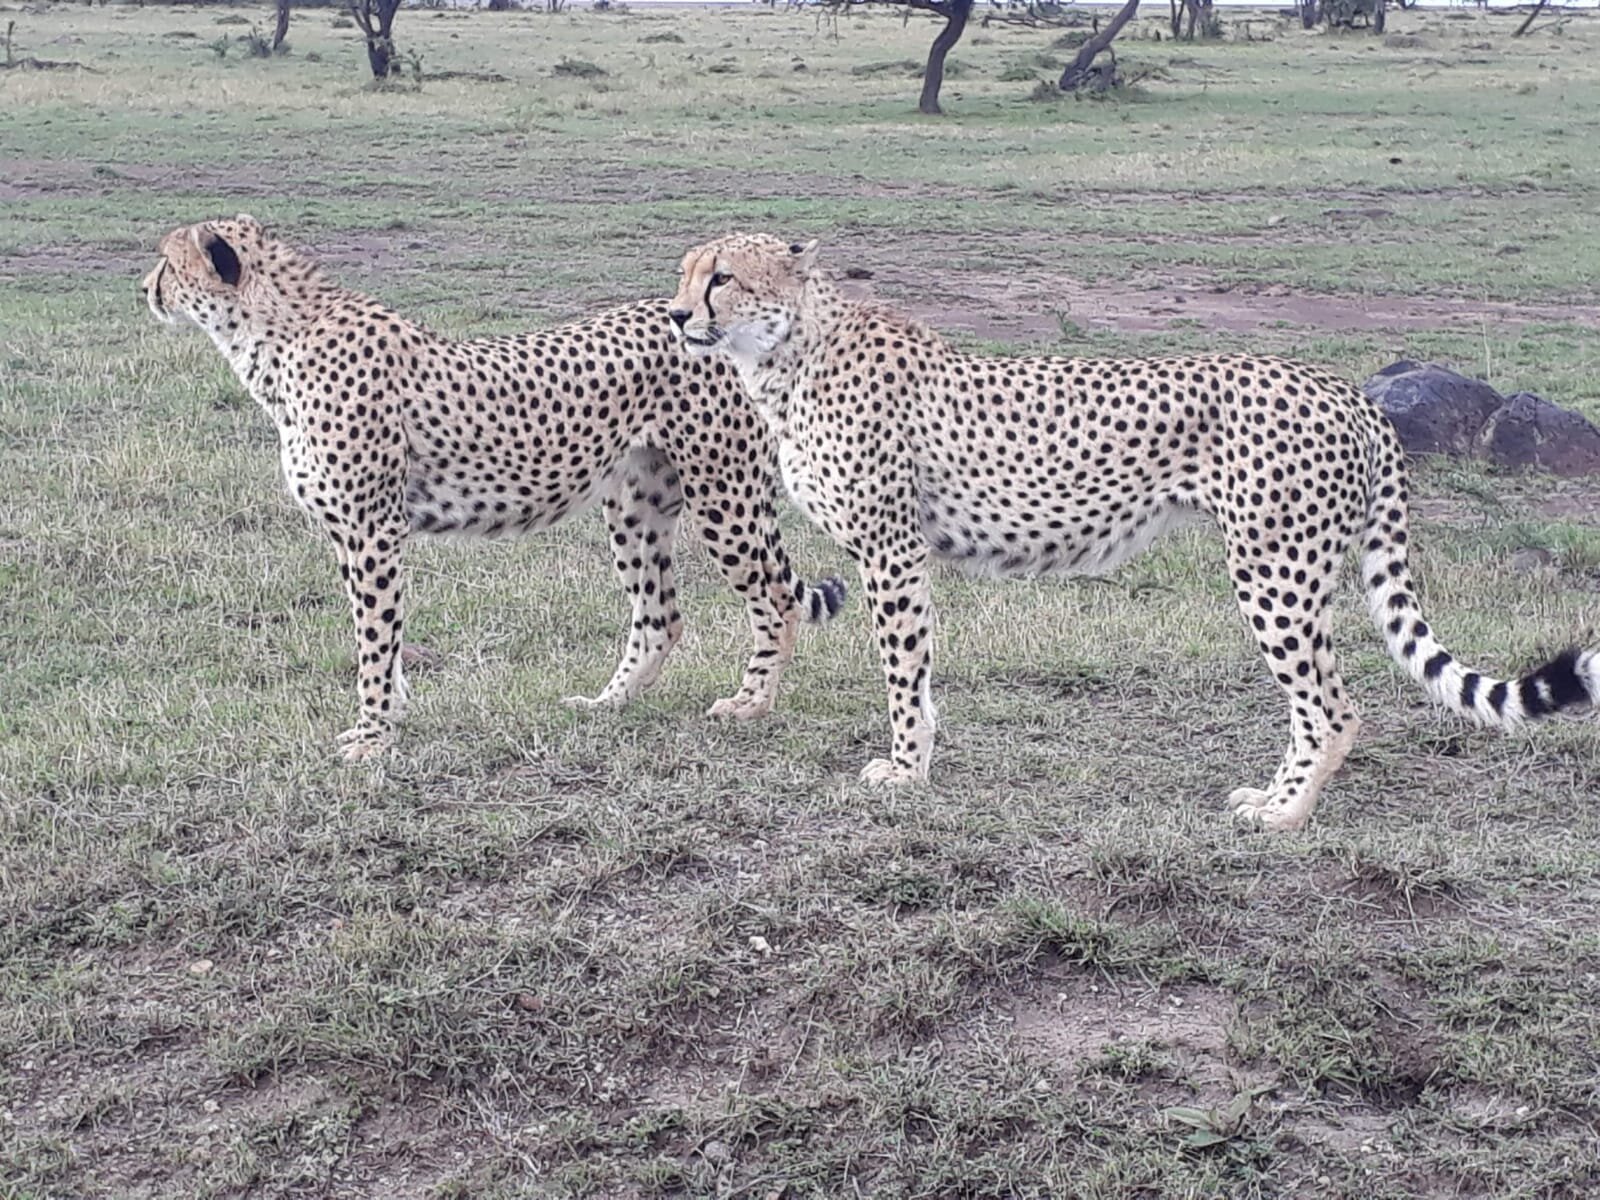 Two male cheetahs before a chase.